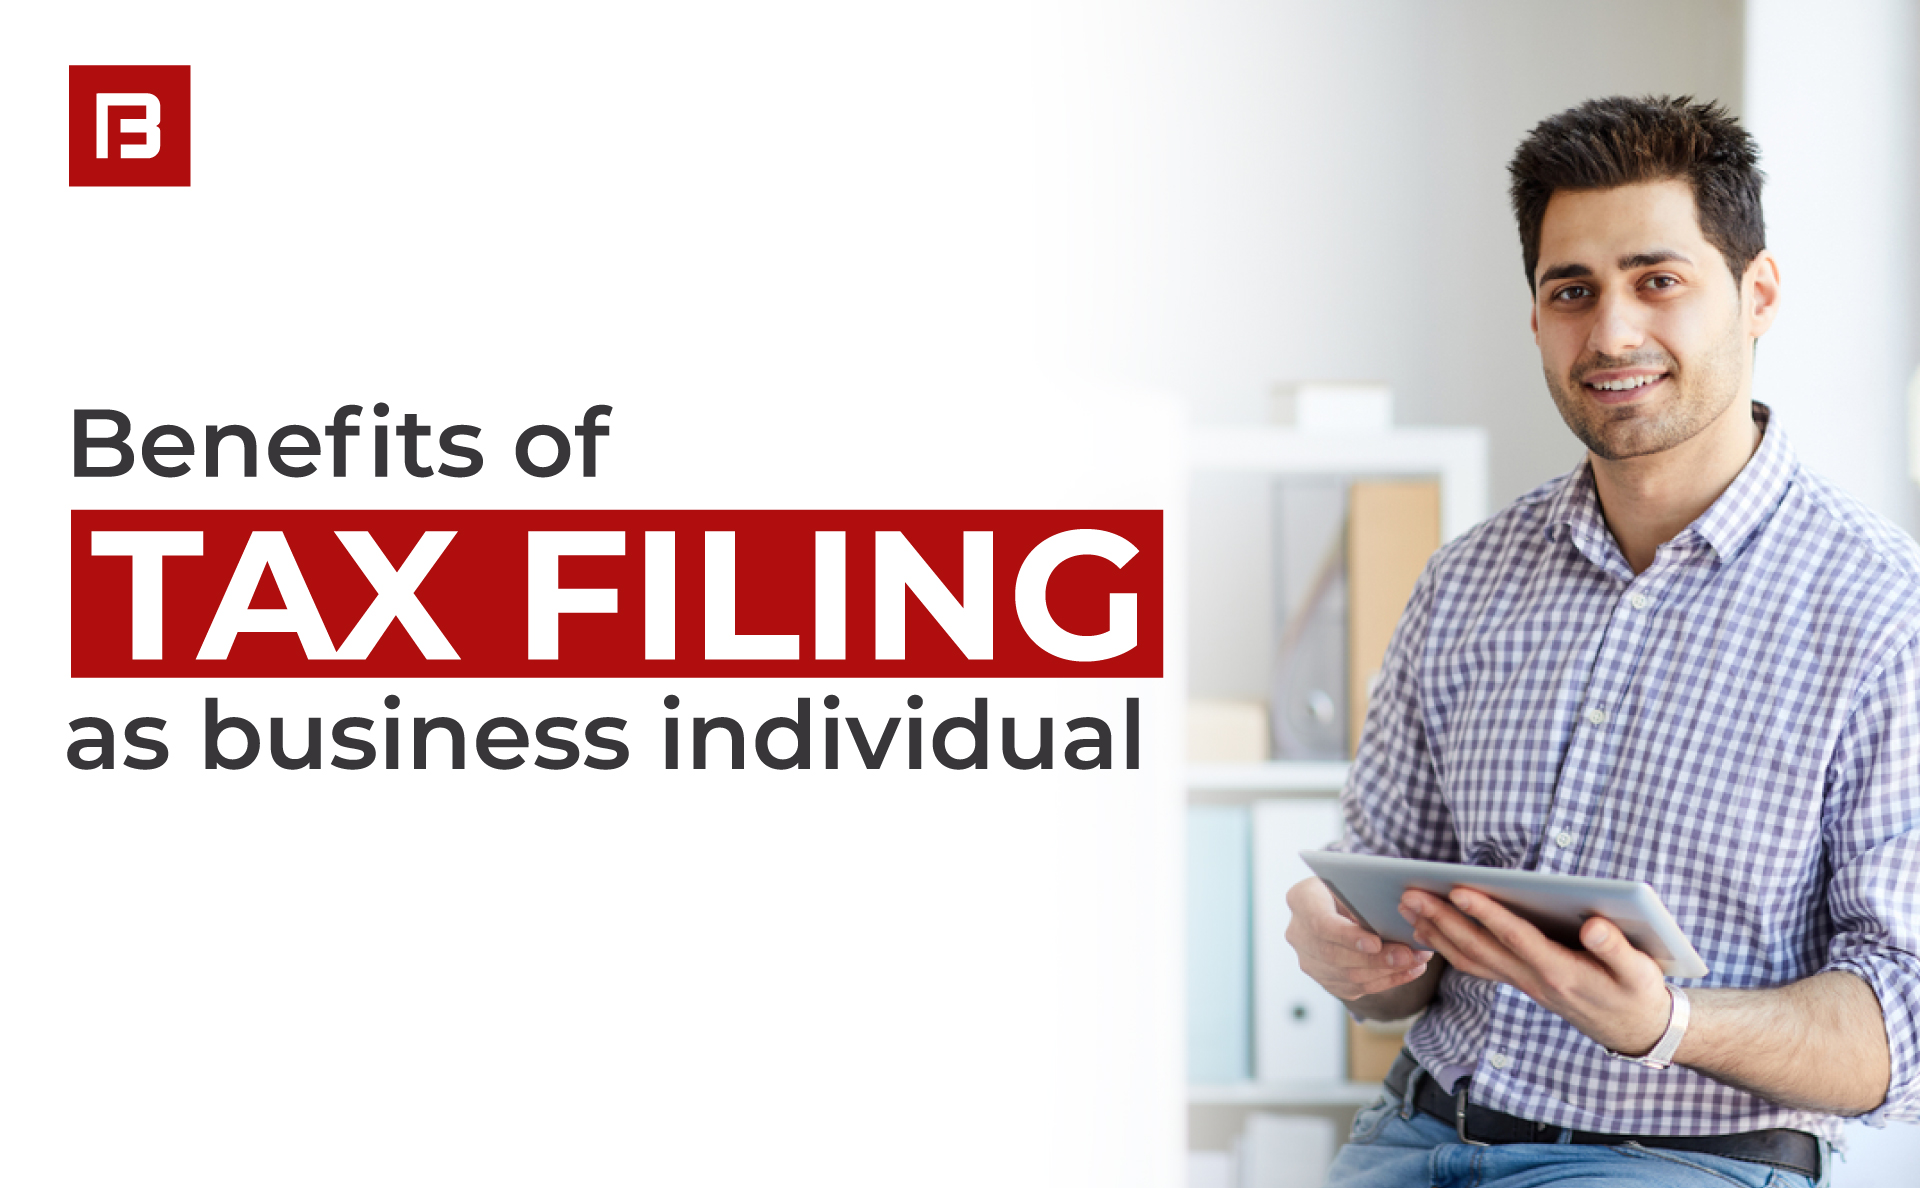 Benefits of tax filing as business individual